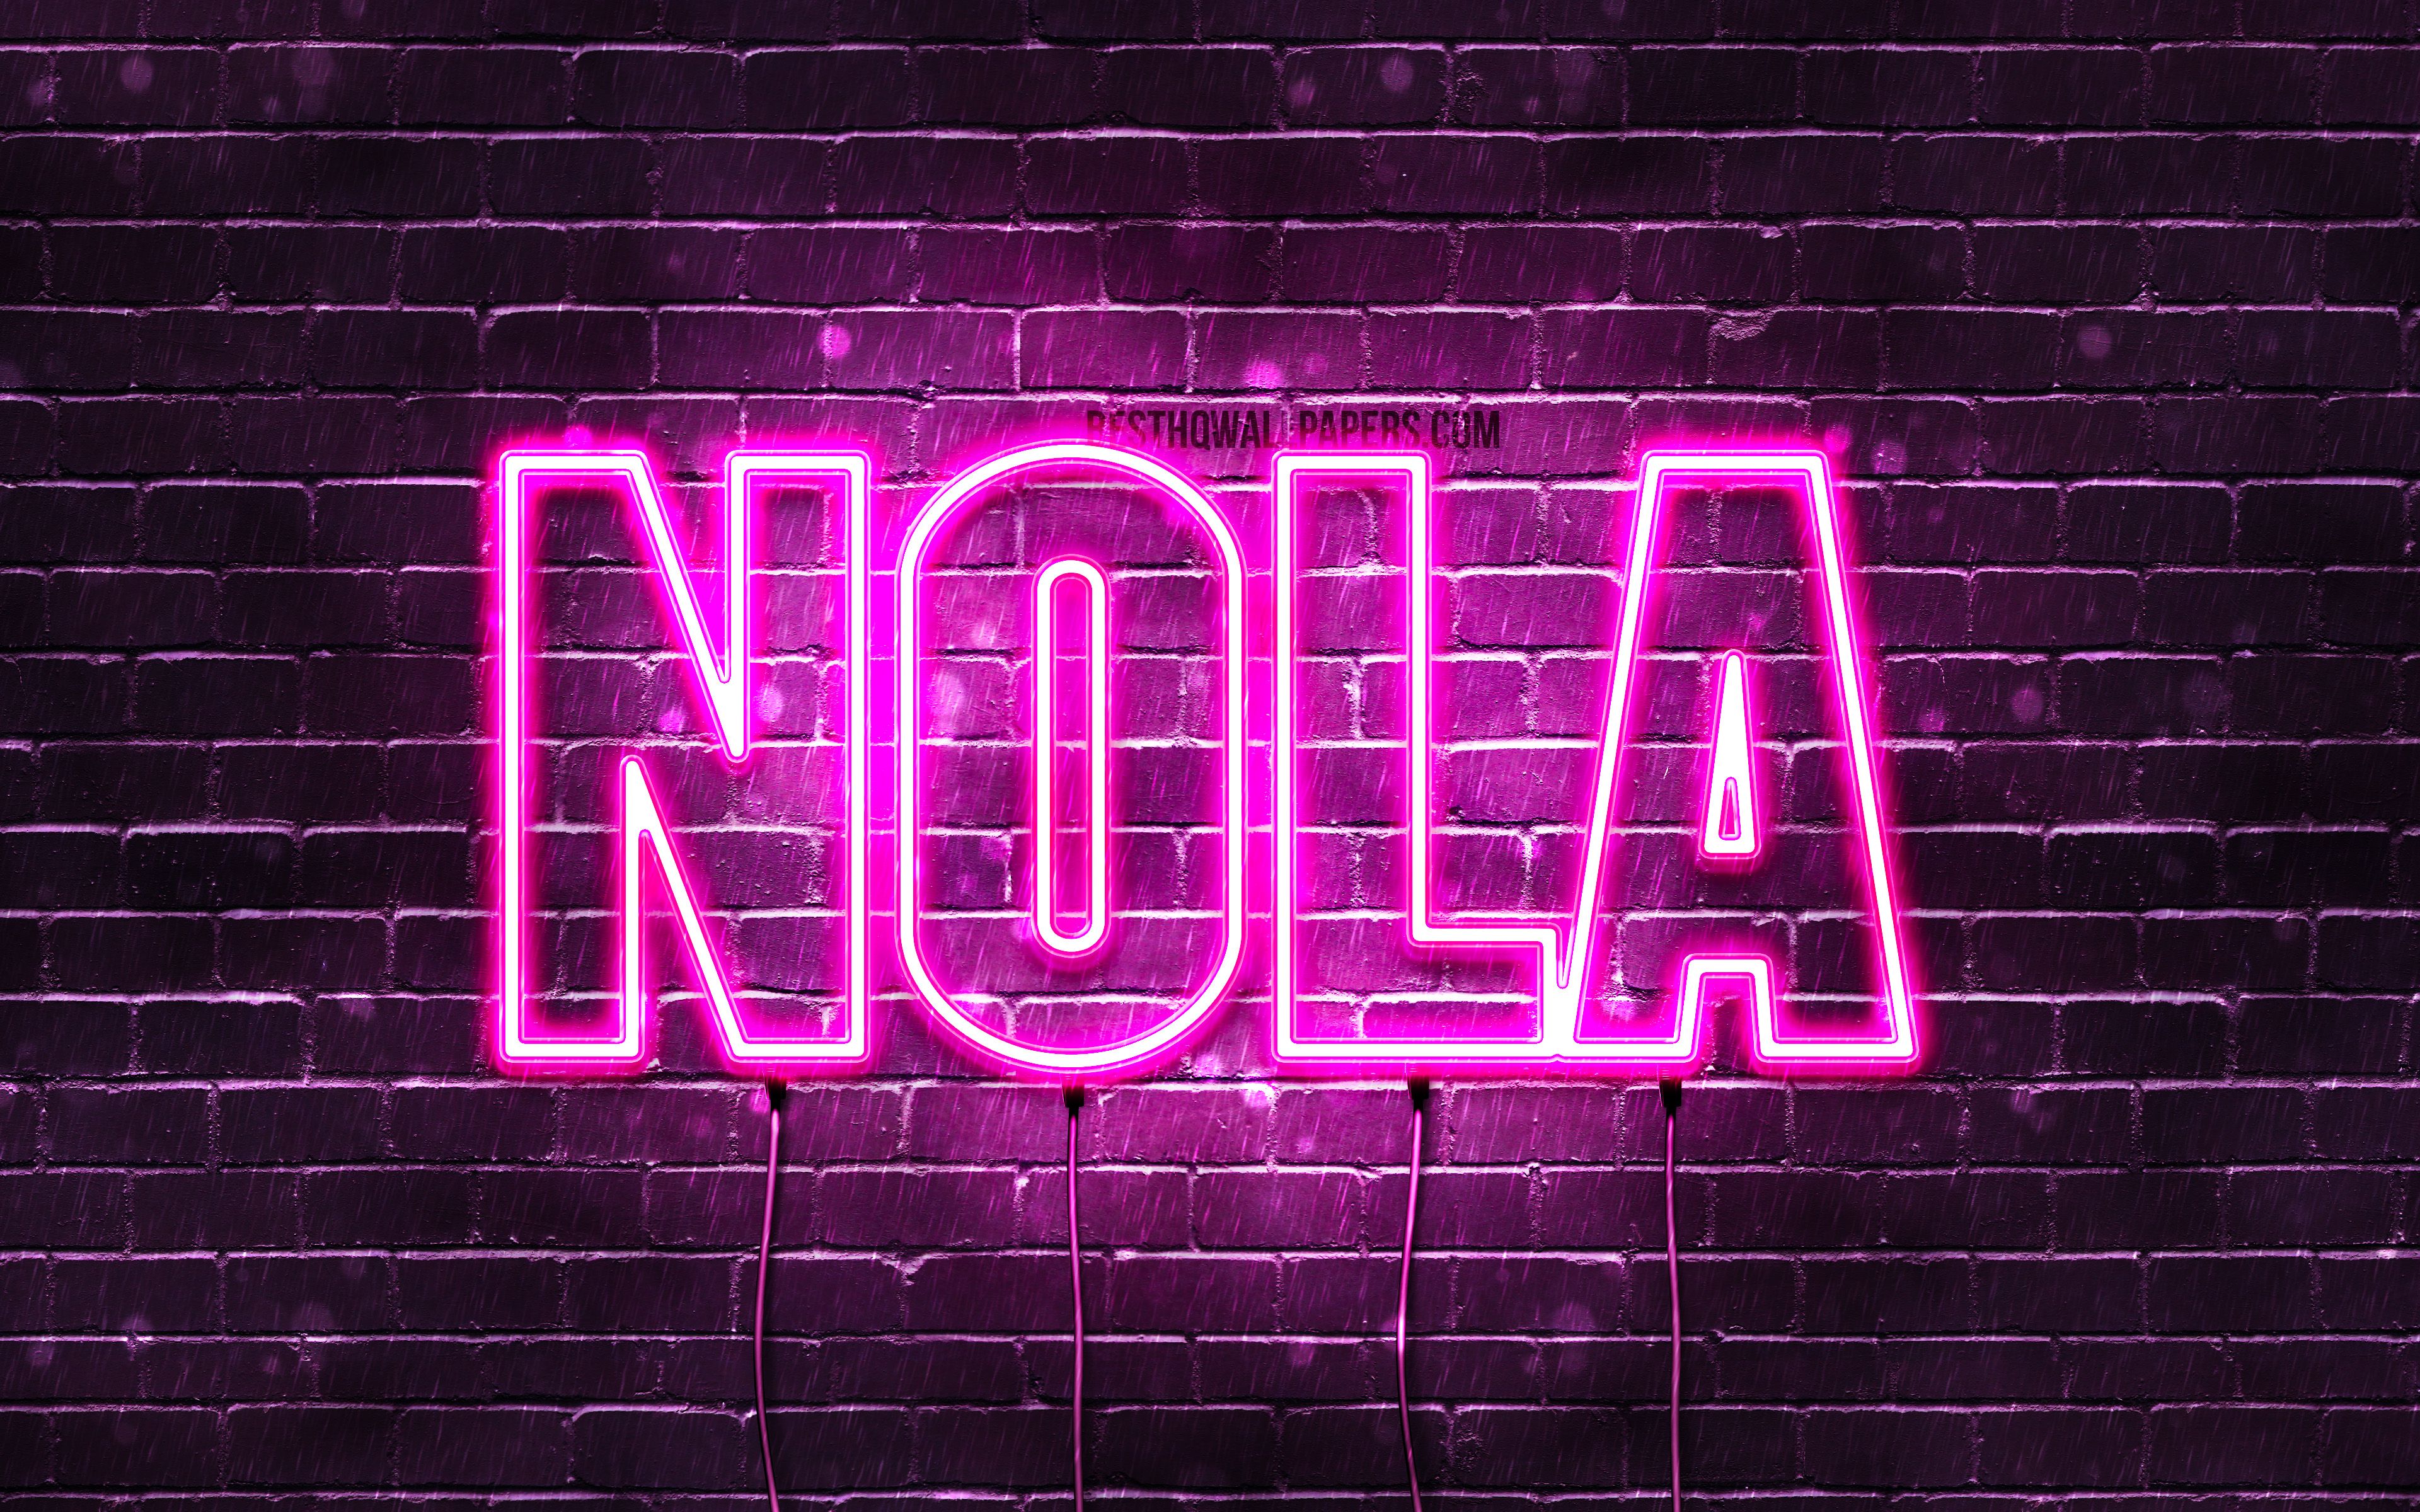 Download wallpaper Nola, 4k, wallpaper with names, female names, Nola name, purple neon lights, horizontal text, picture with Nola name for desktop with resolution 3840x2400. High Quality HD picture wallpaper